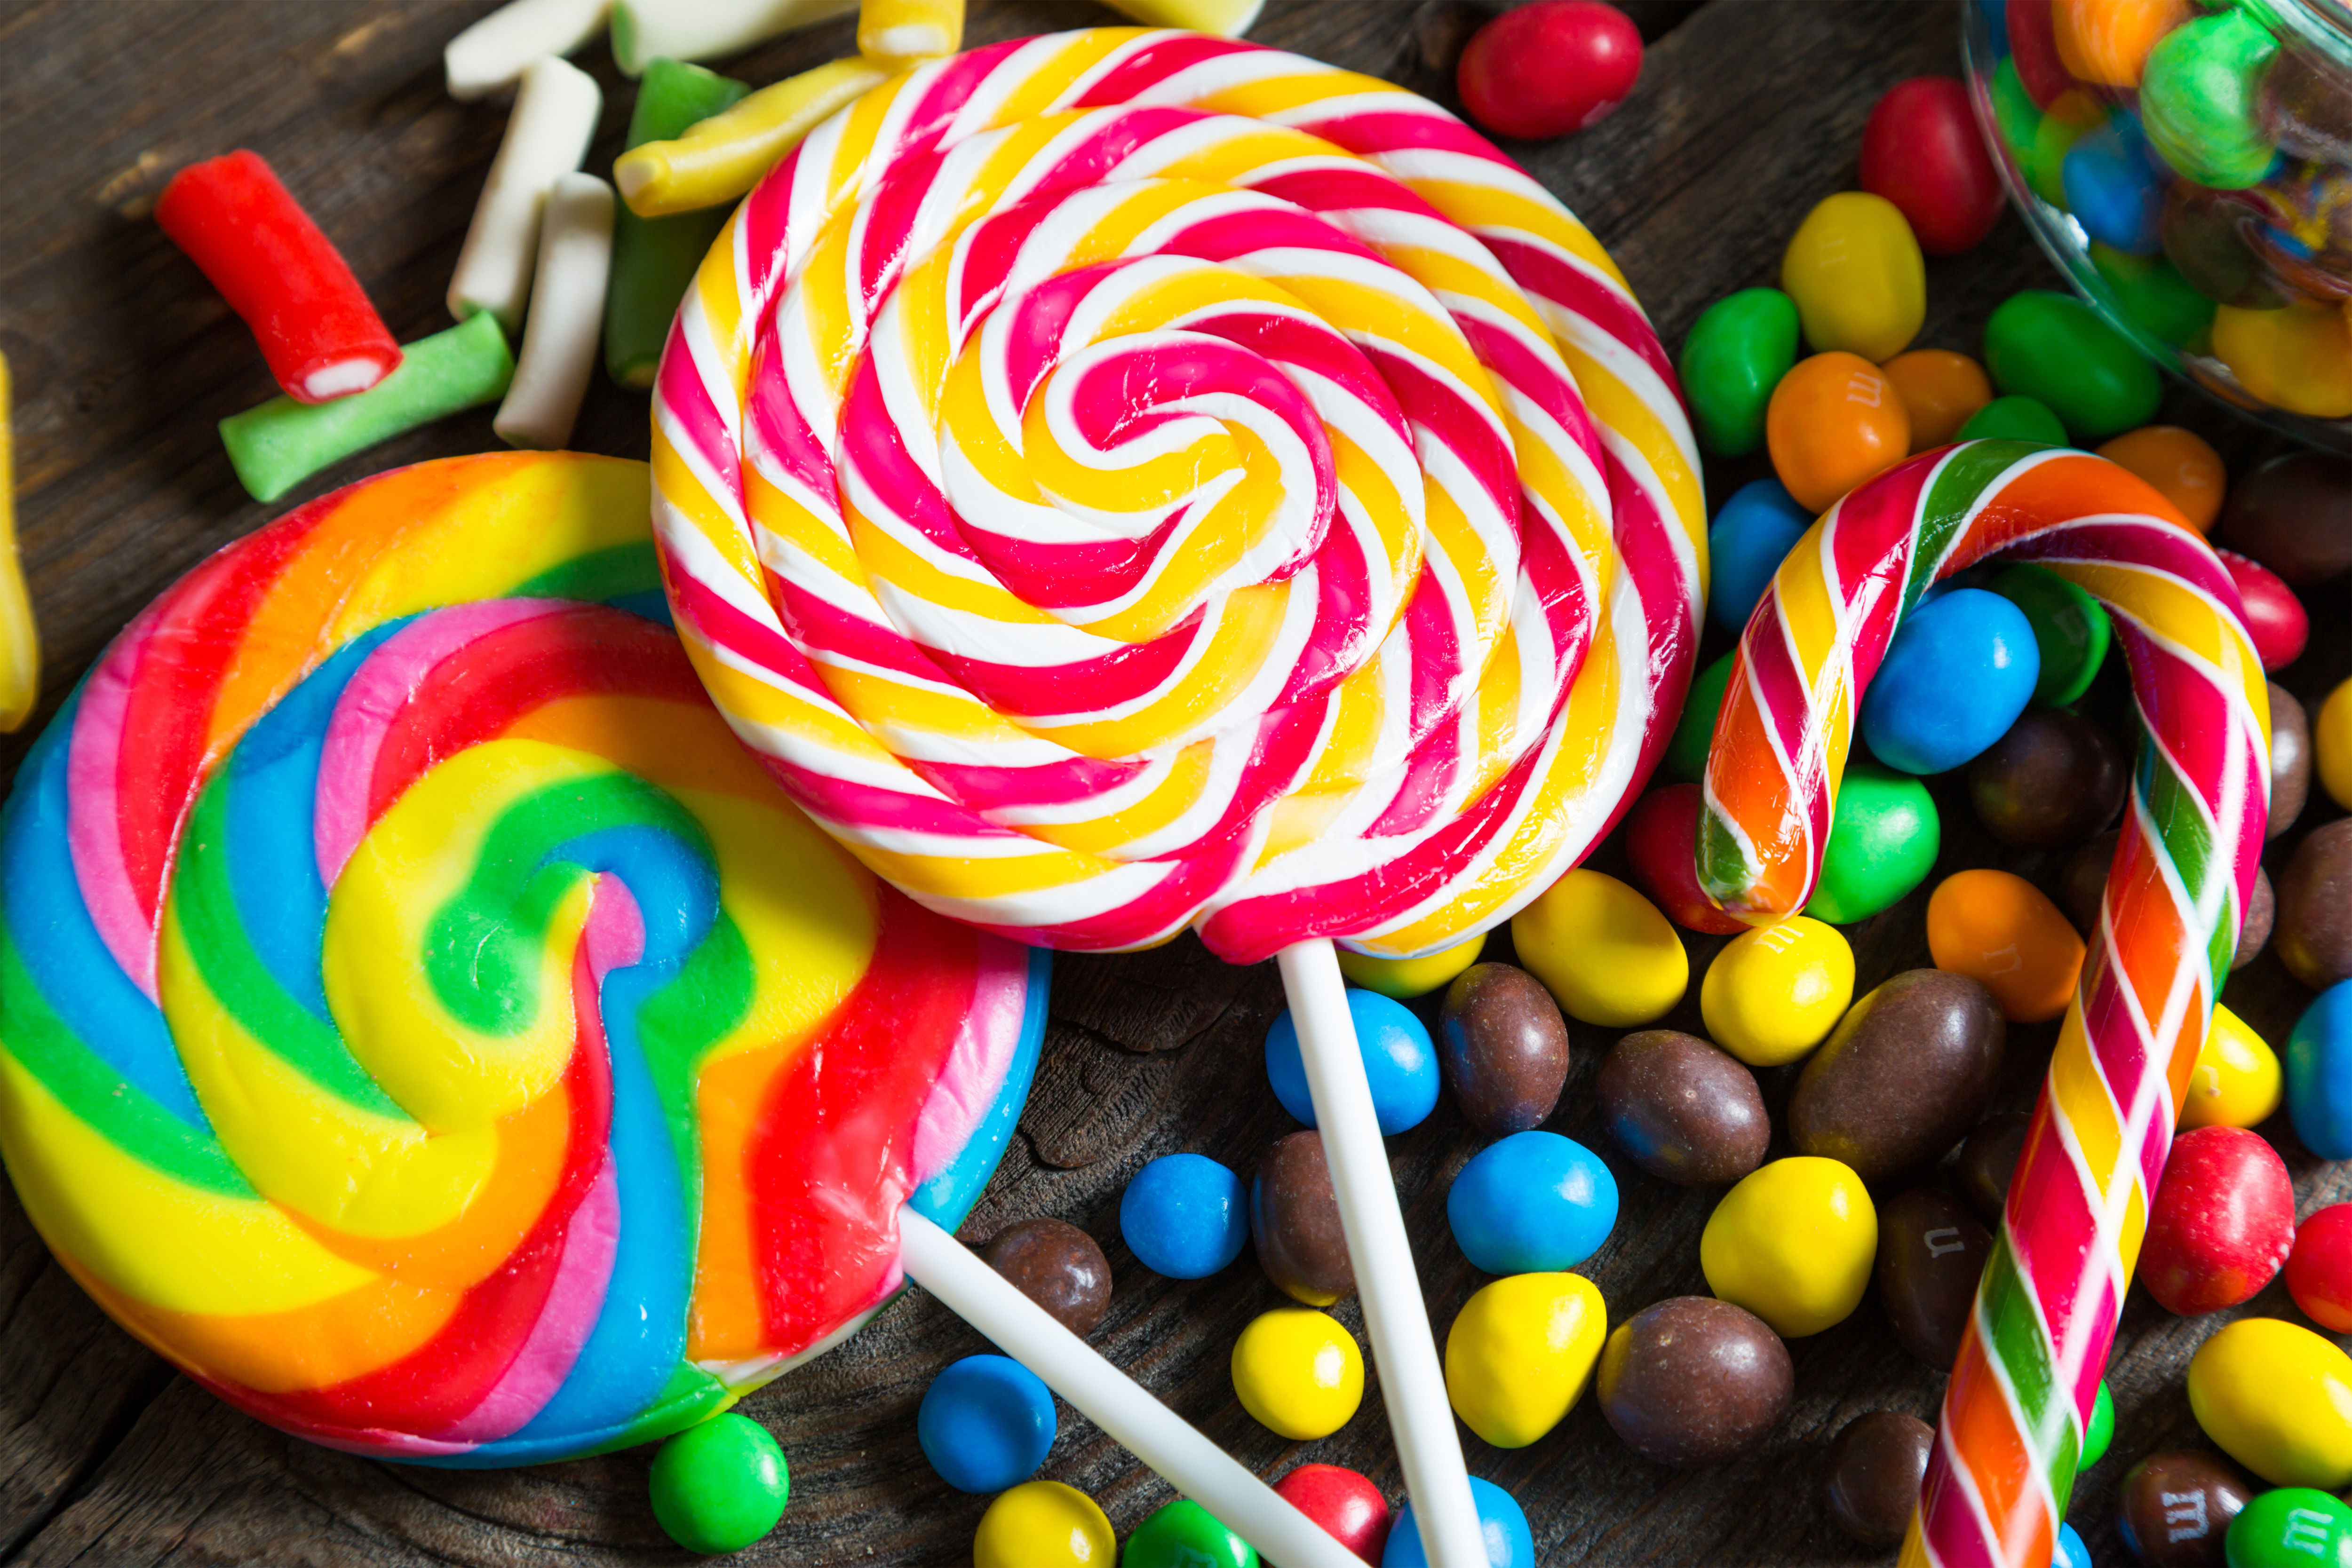 Lollipop Candy Background Gallery Yopriceville High Quality Images, Photos, Reviews